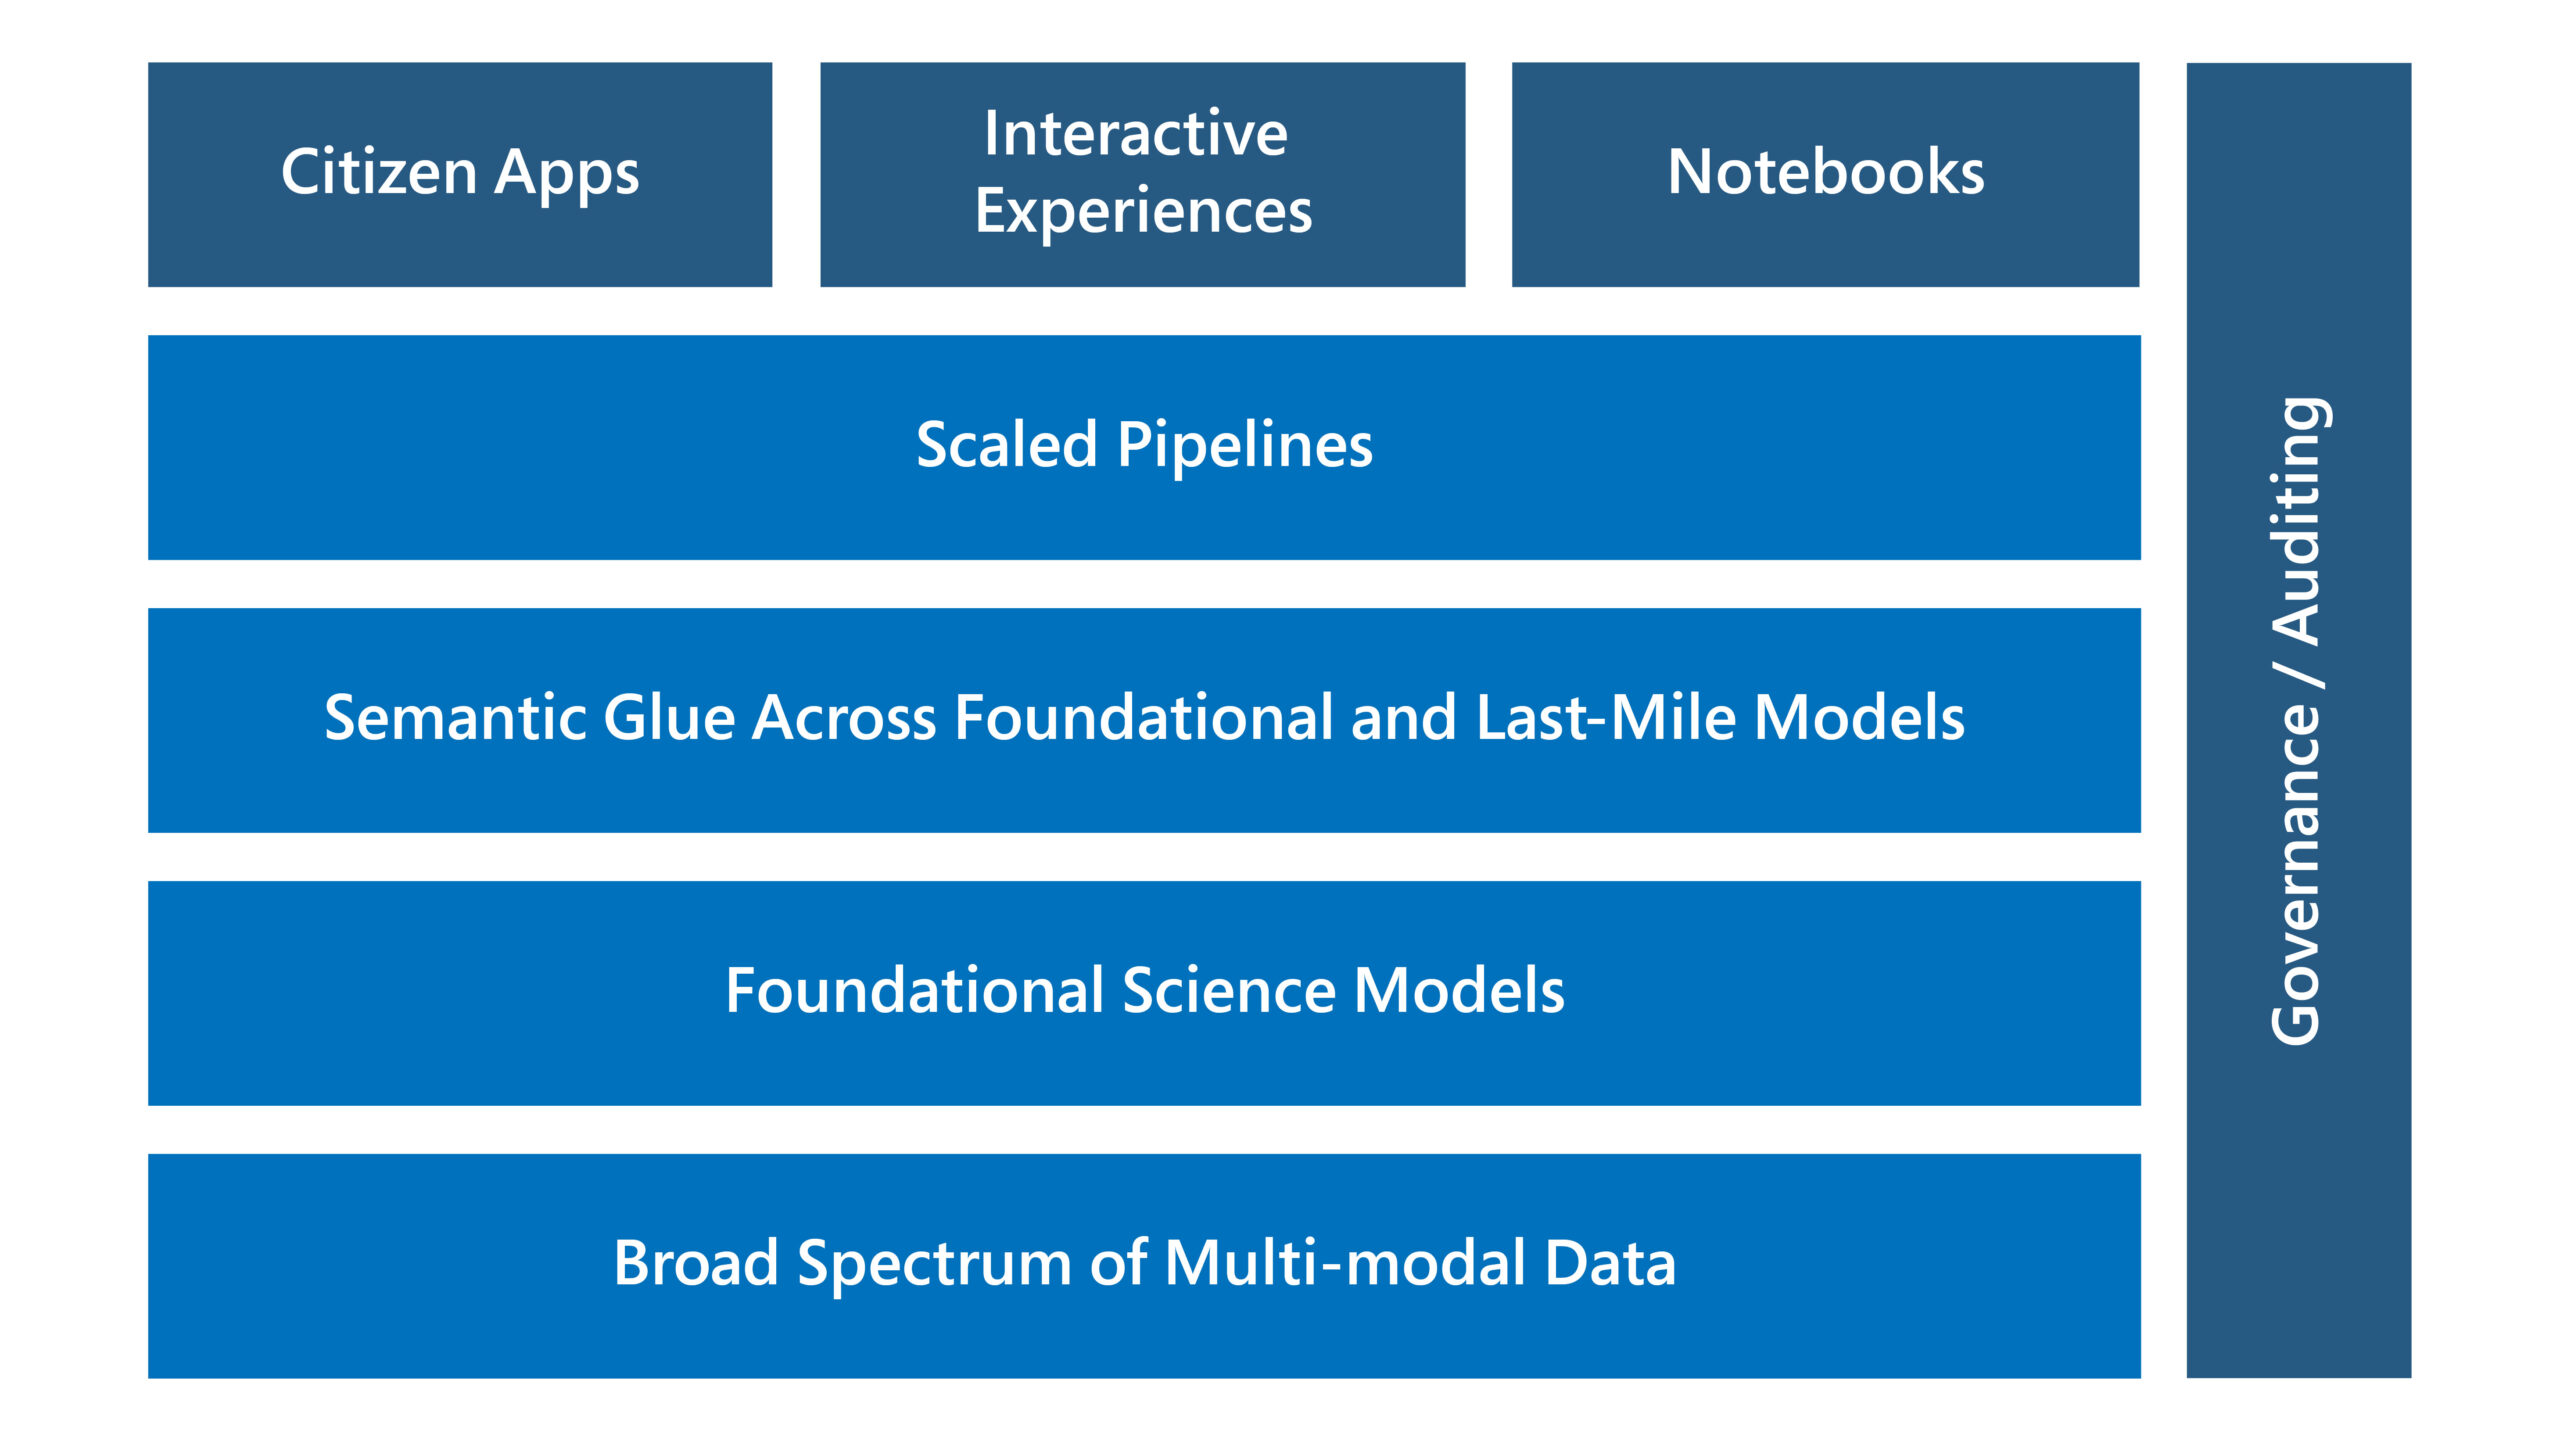 The image, which consists of a stack of blue rectangles on the left and one vertical rectangle on the right, shows how Project Science Engine delivers foundational science models, along with a system to consume those models and to govern and evolve AI-amplified R&D activities and collaborations.